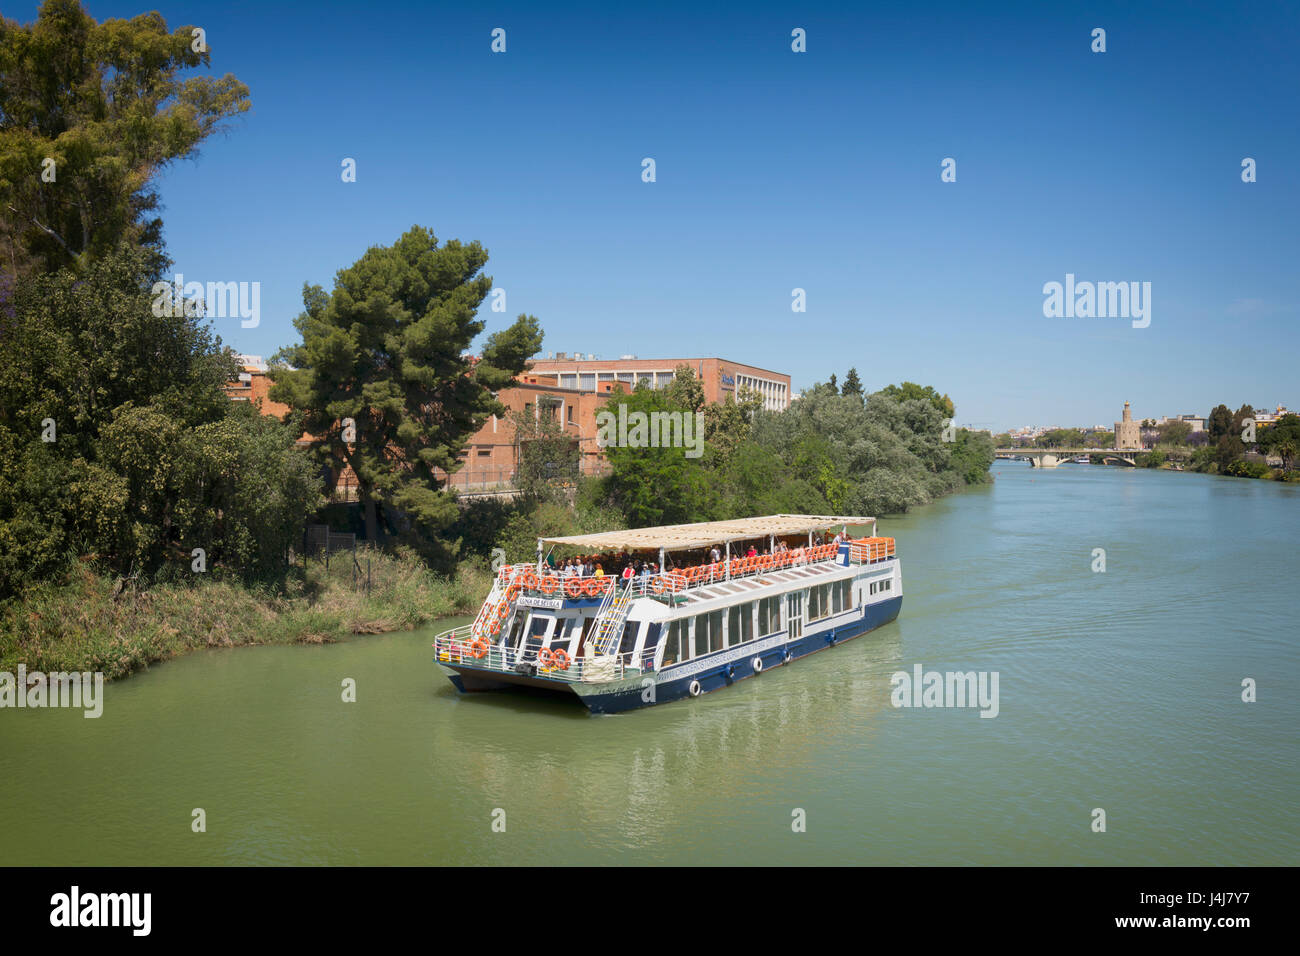 Seville, Seville Province, Andalusia, southern Spain.  Pleasure cruise boat on the Guadalquivir river. Torre del Oro (Tower of Gold) in the distance o Stock Photo